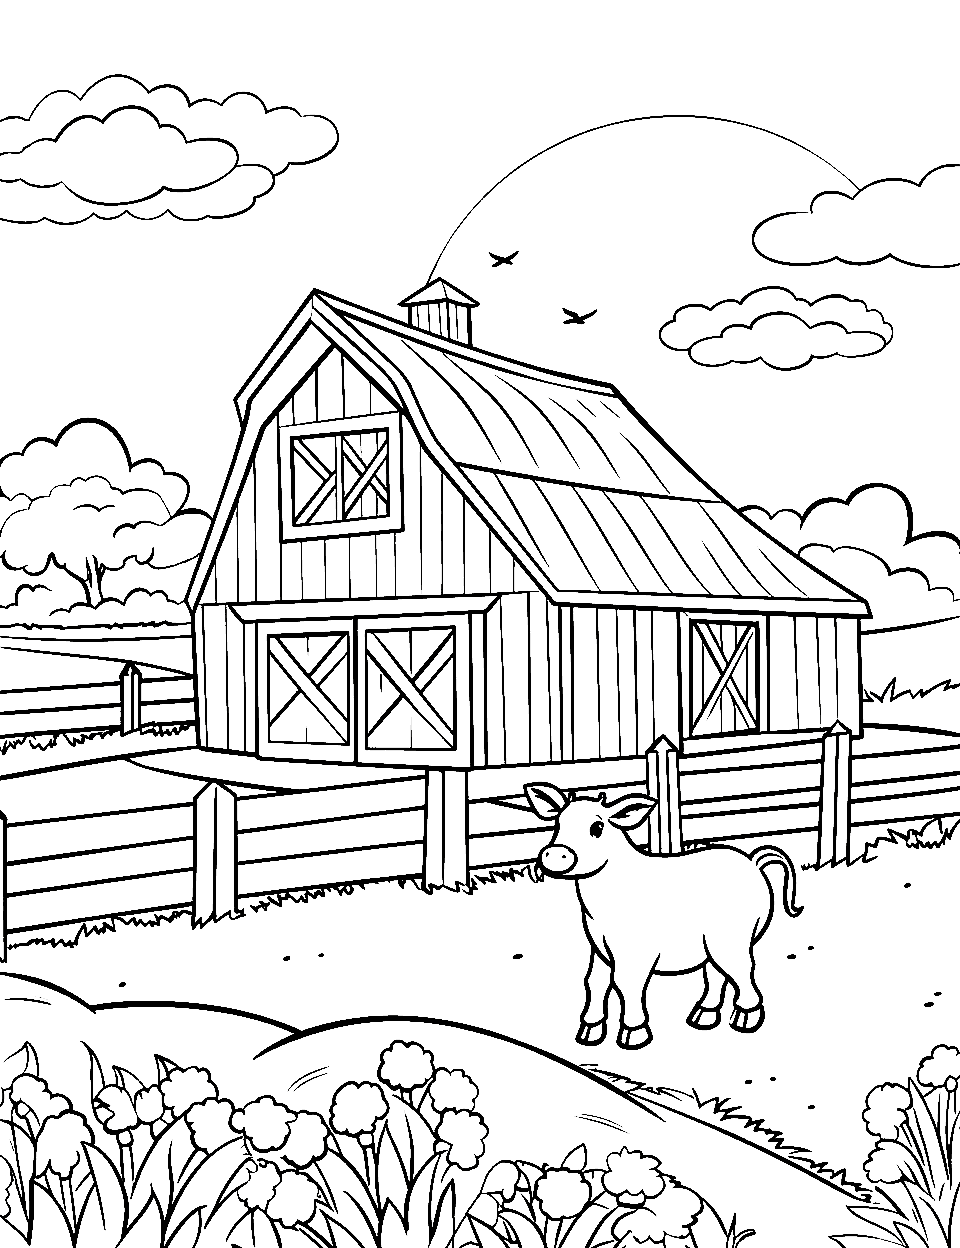 Sunny Day on the Farm Coloring Page - A simple farm scene with a barn, a sun, and a few clouds.